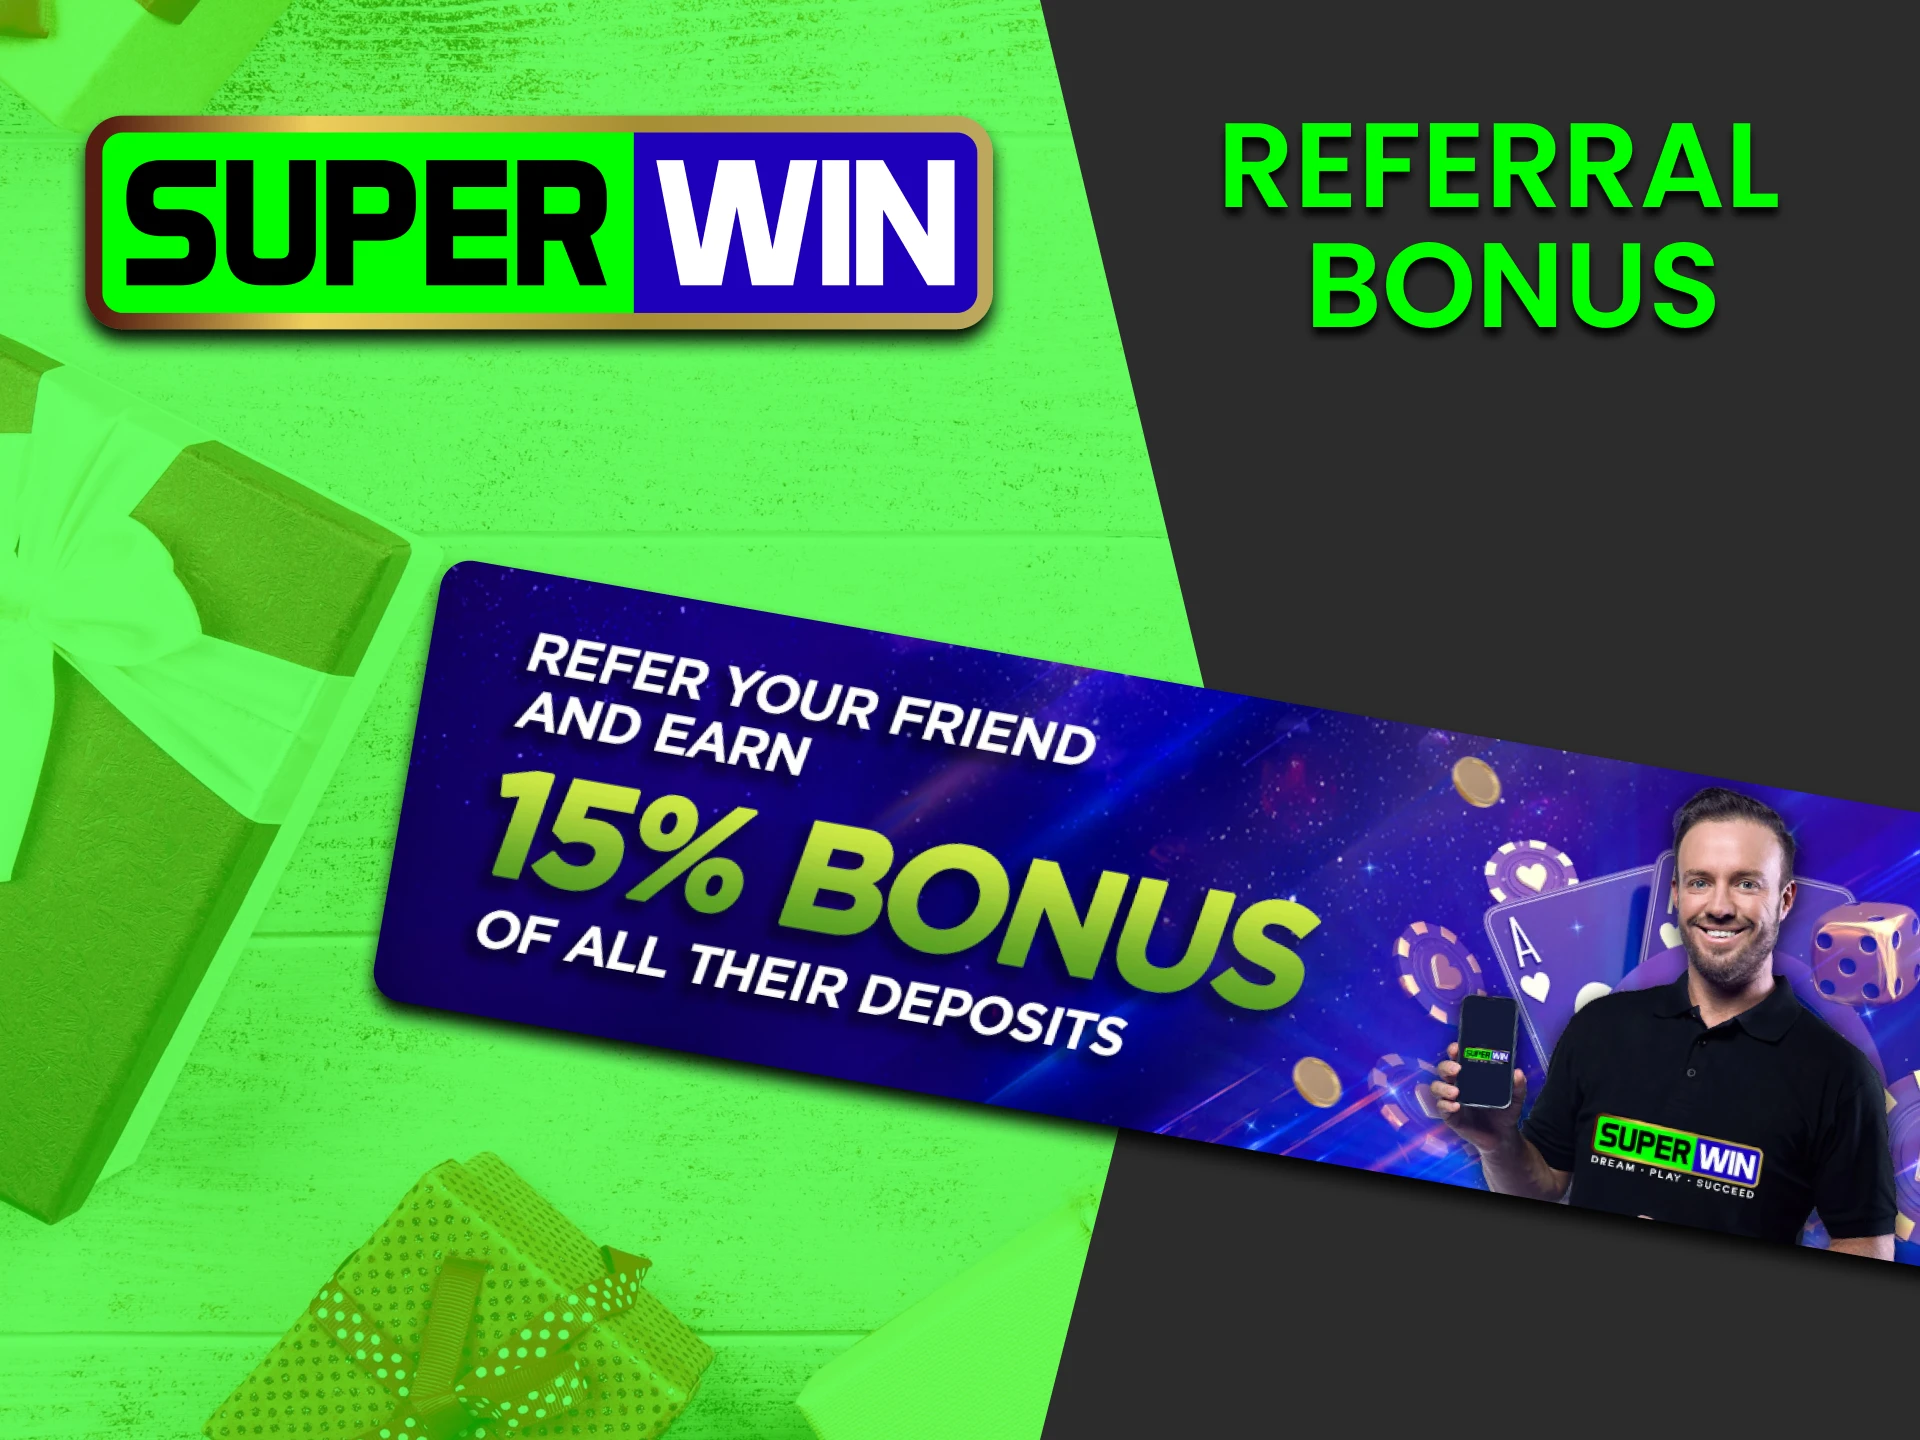 Superwin gives a bonus for inviting new users.